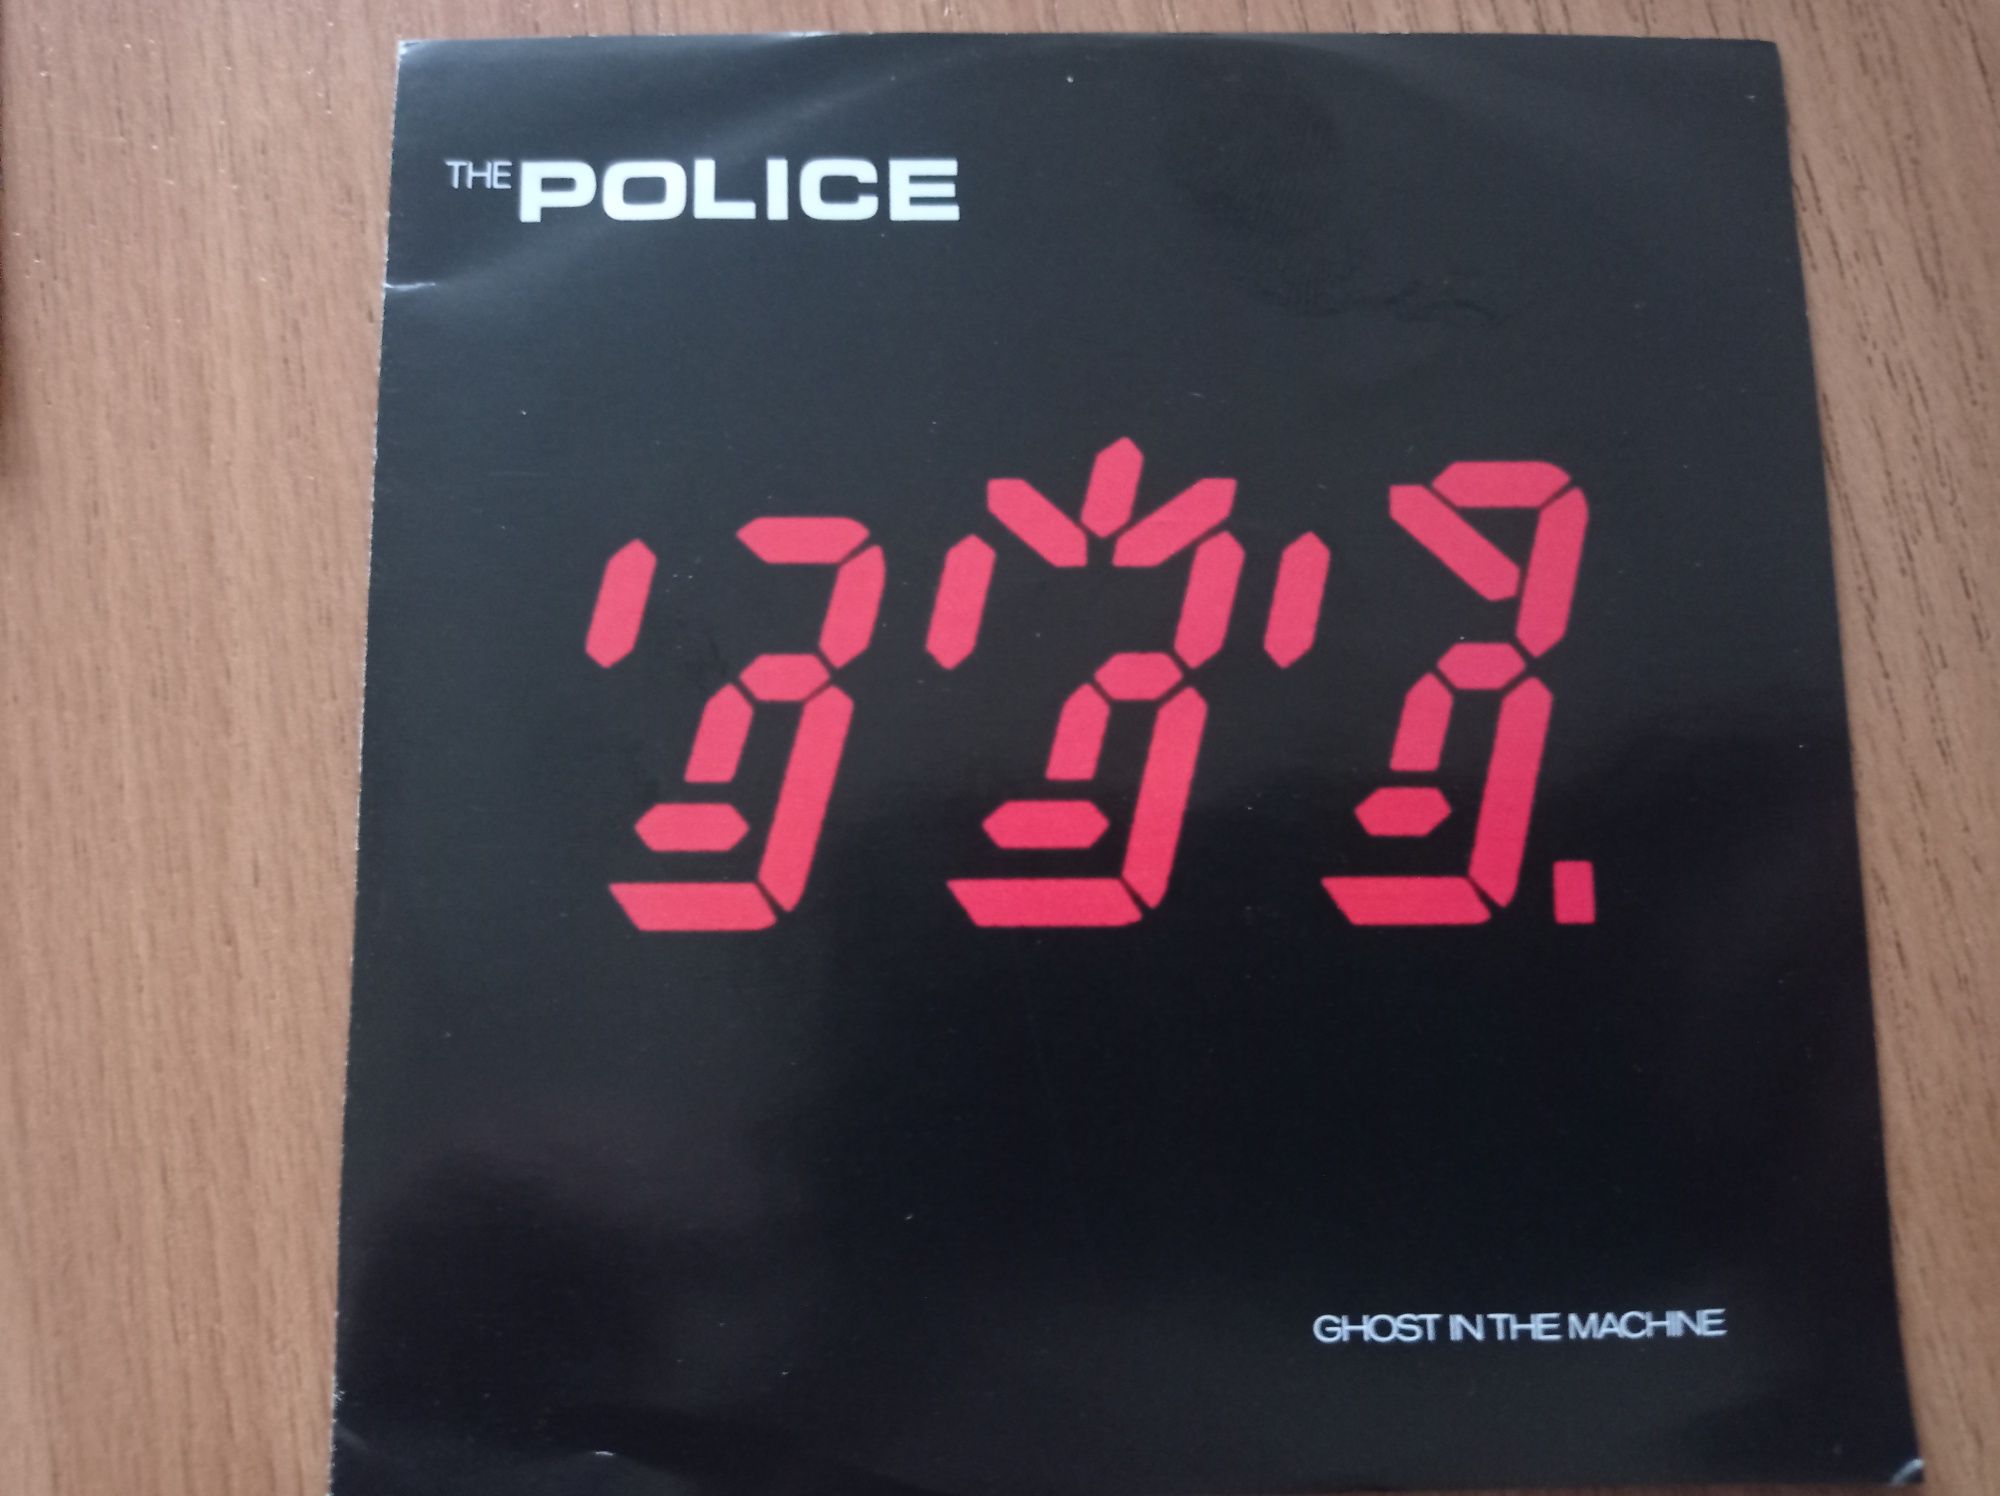 The Police - Ghost in The machine